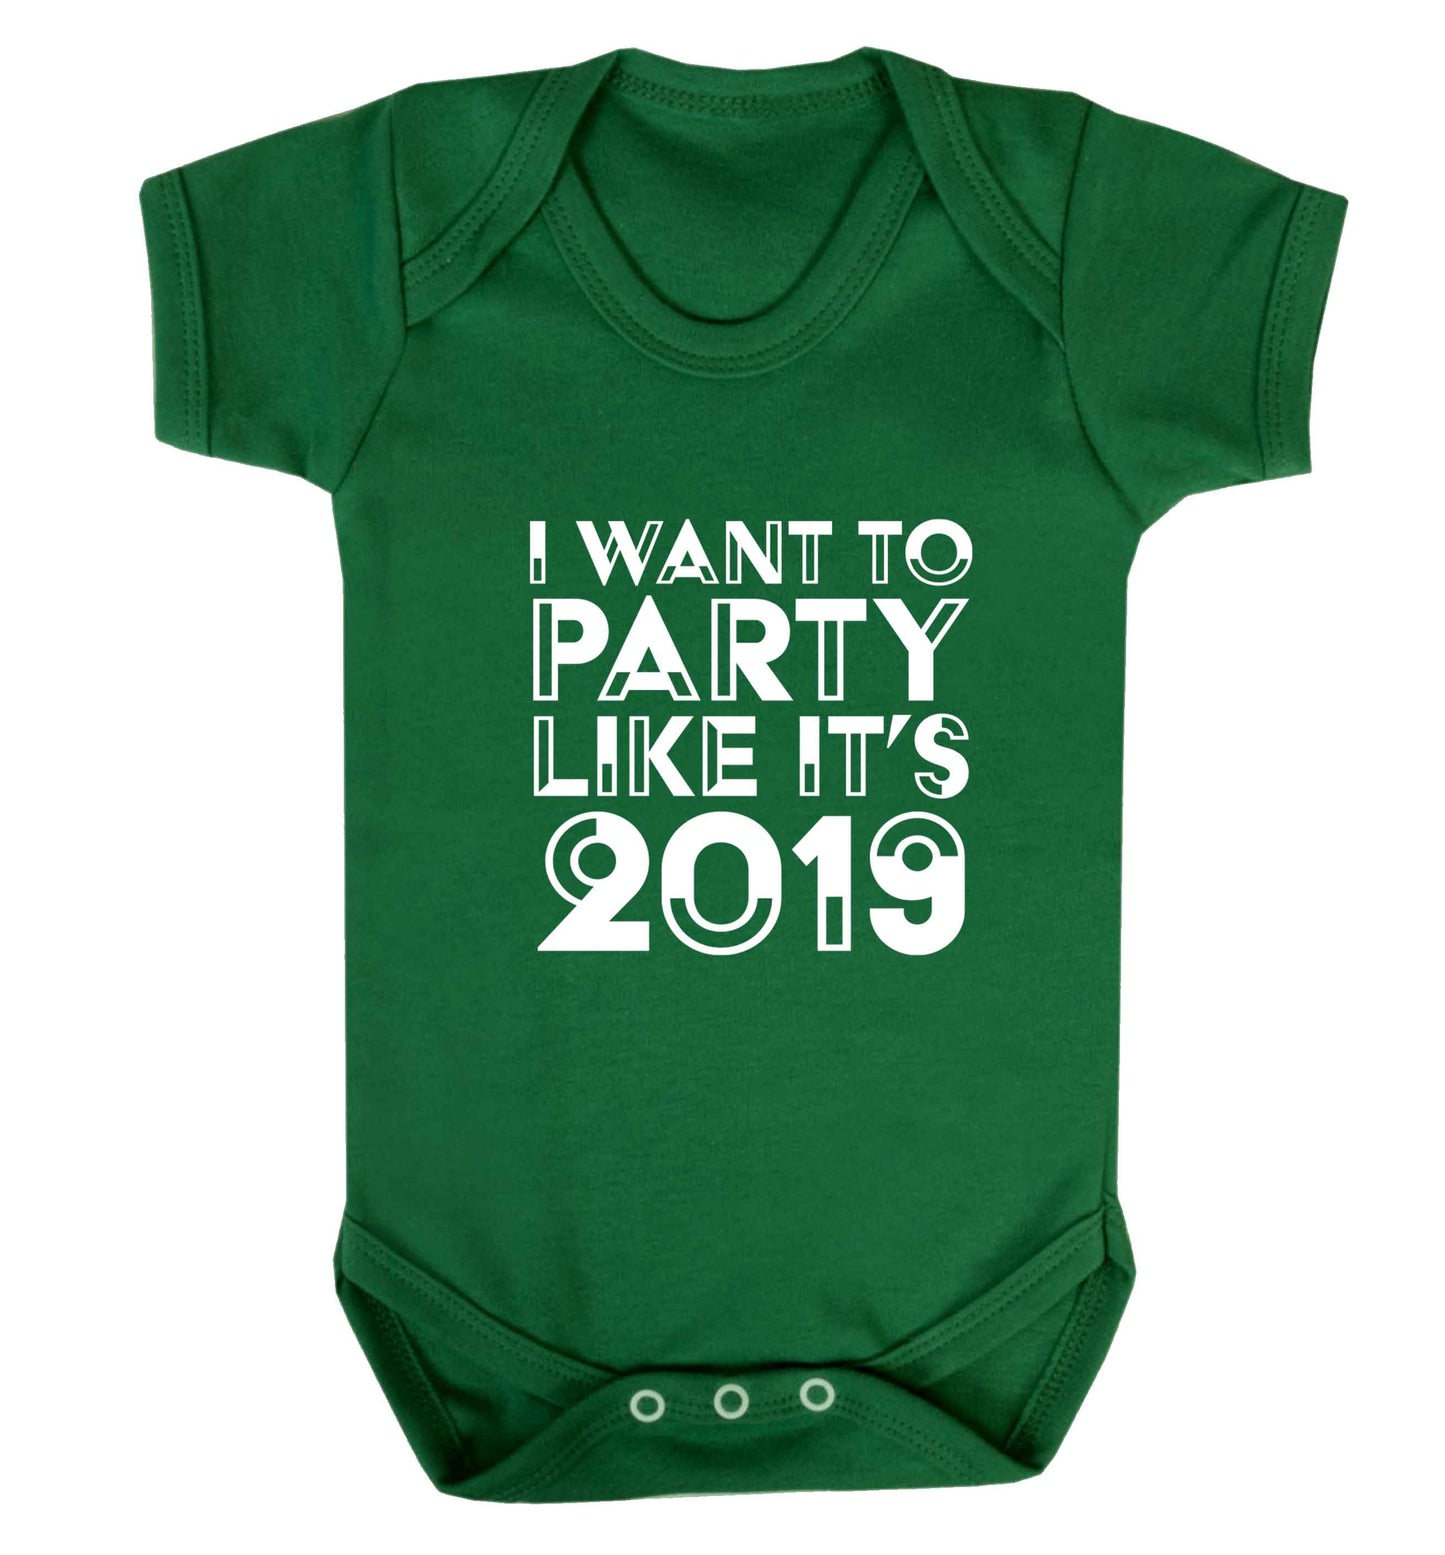 I want to party like it's 2019 baby vest green 18-24 months